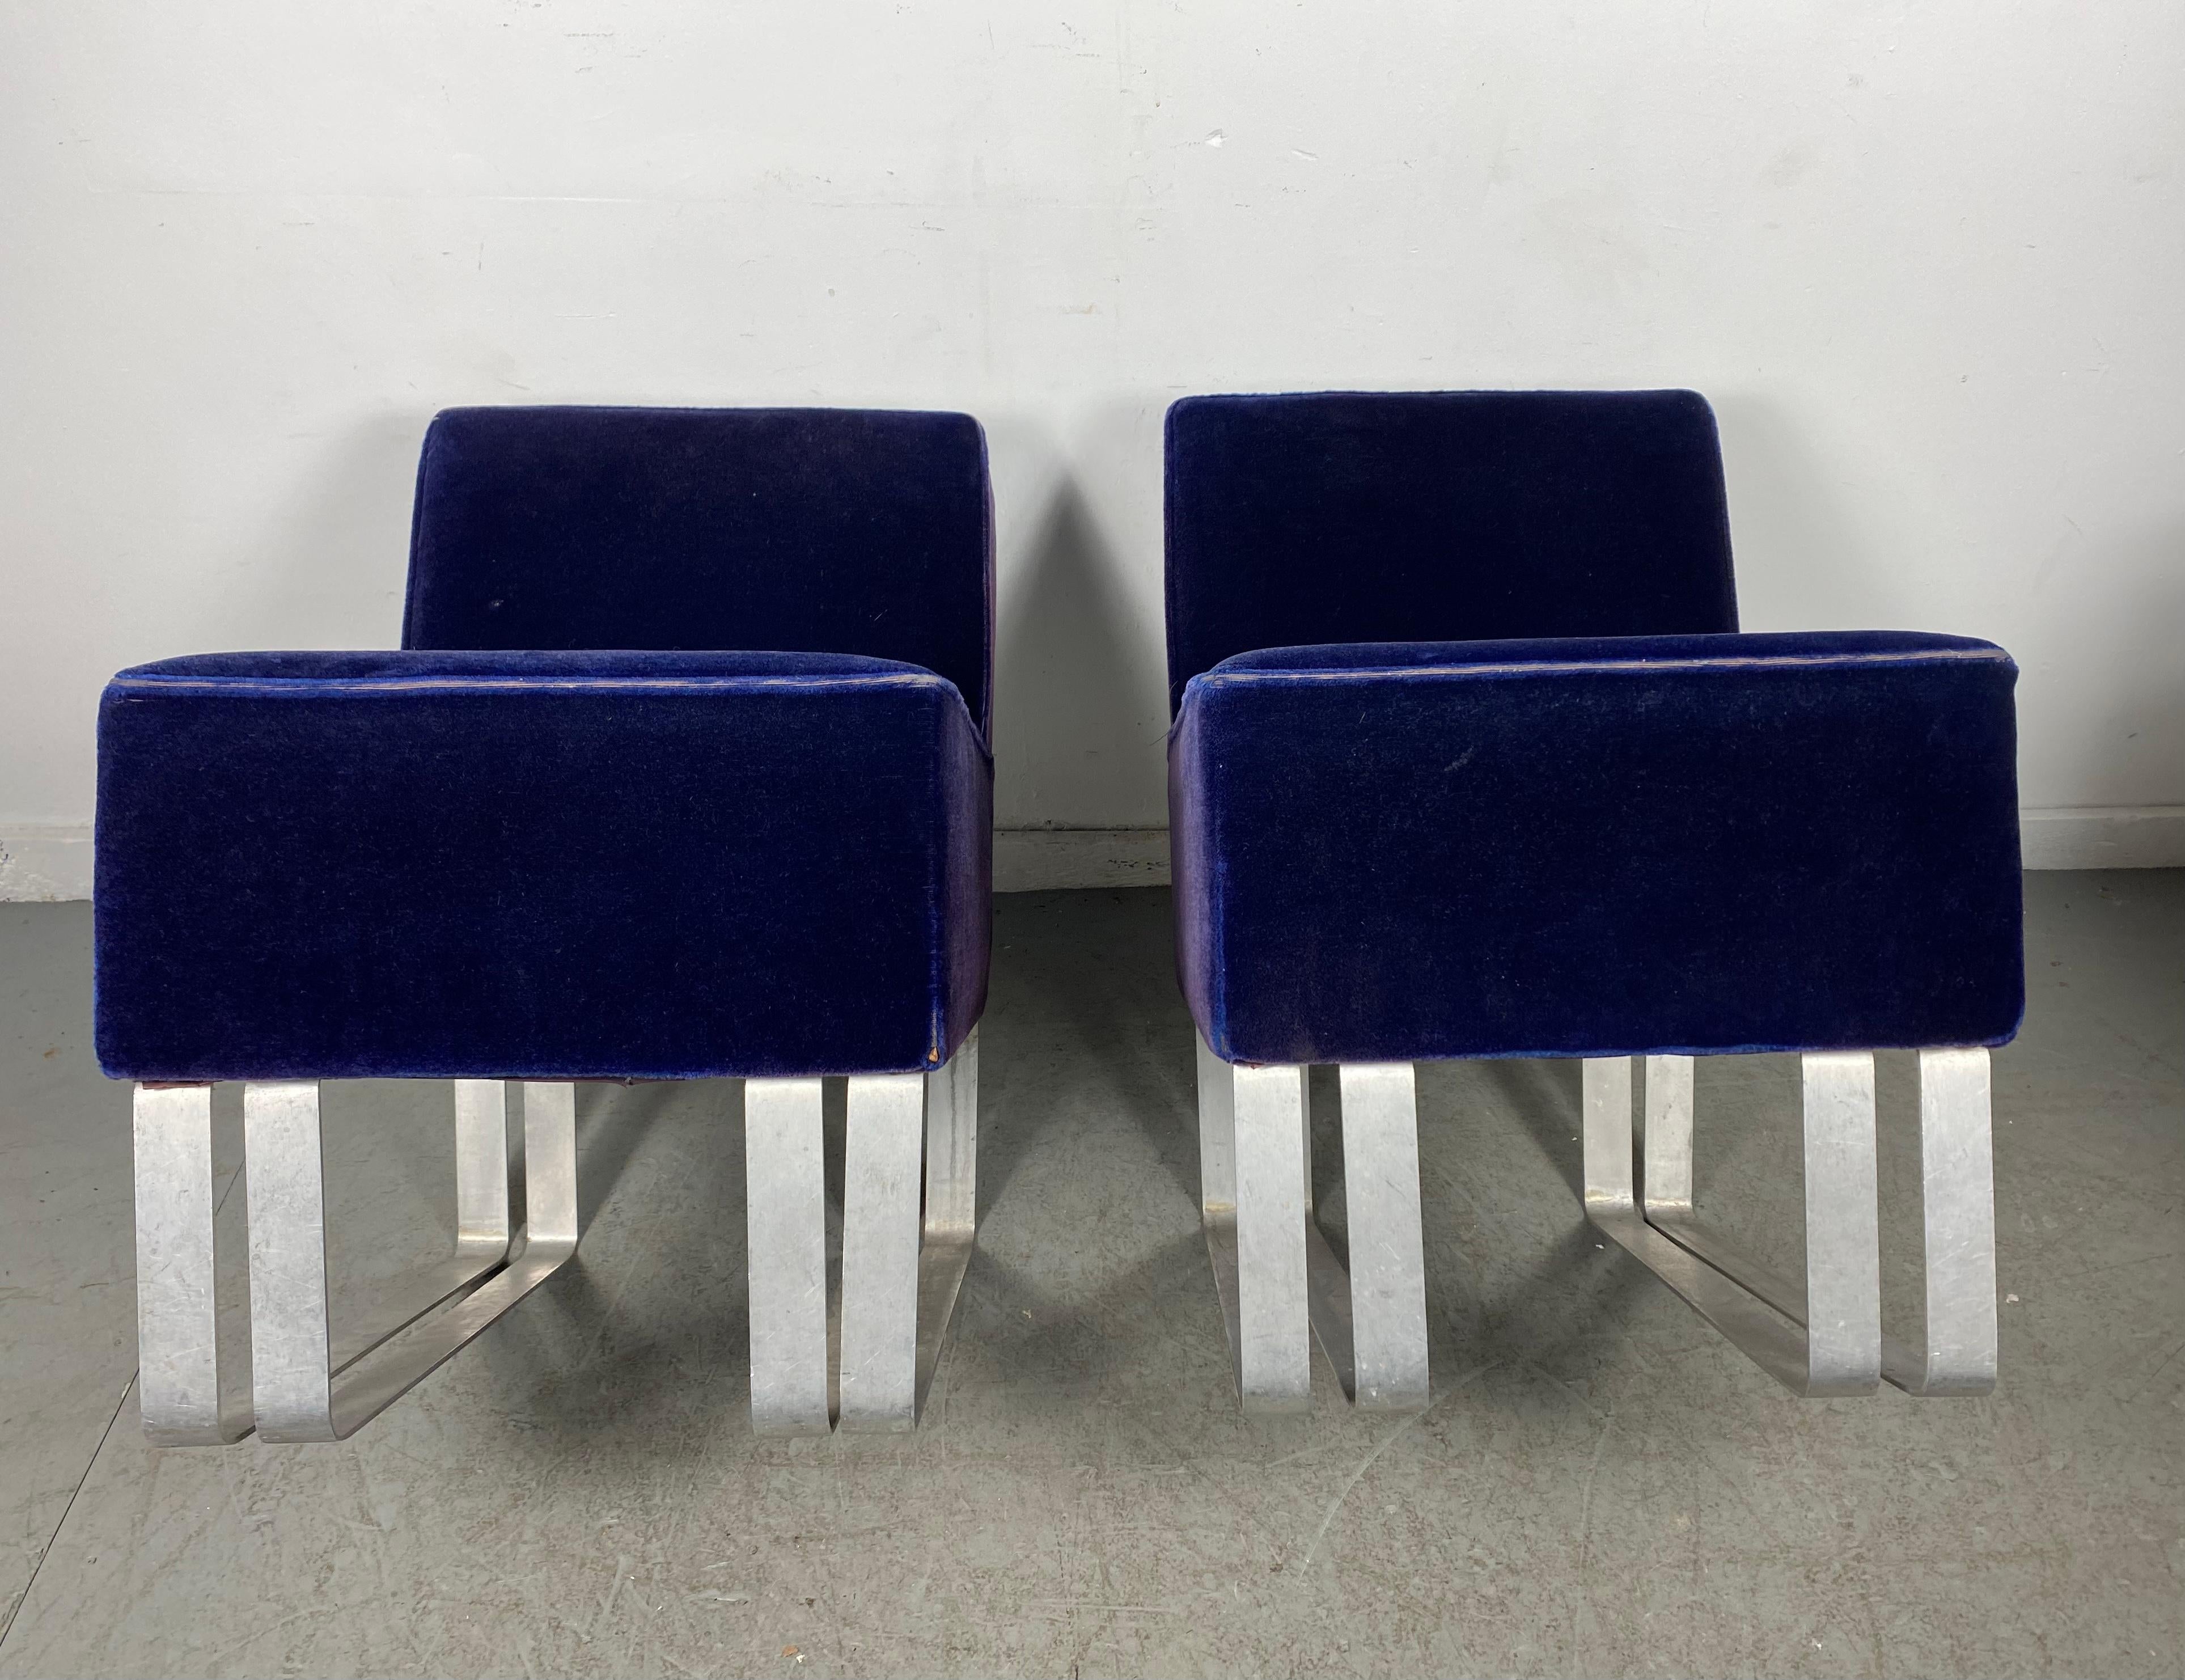 Metal Rare Modernist Slipper Chairs by Donald Deskey for Deskey -Vollmer For Sale